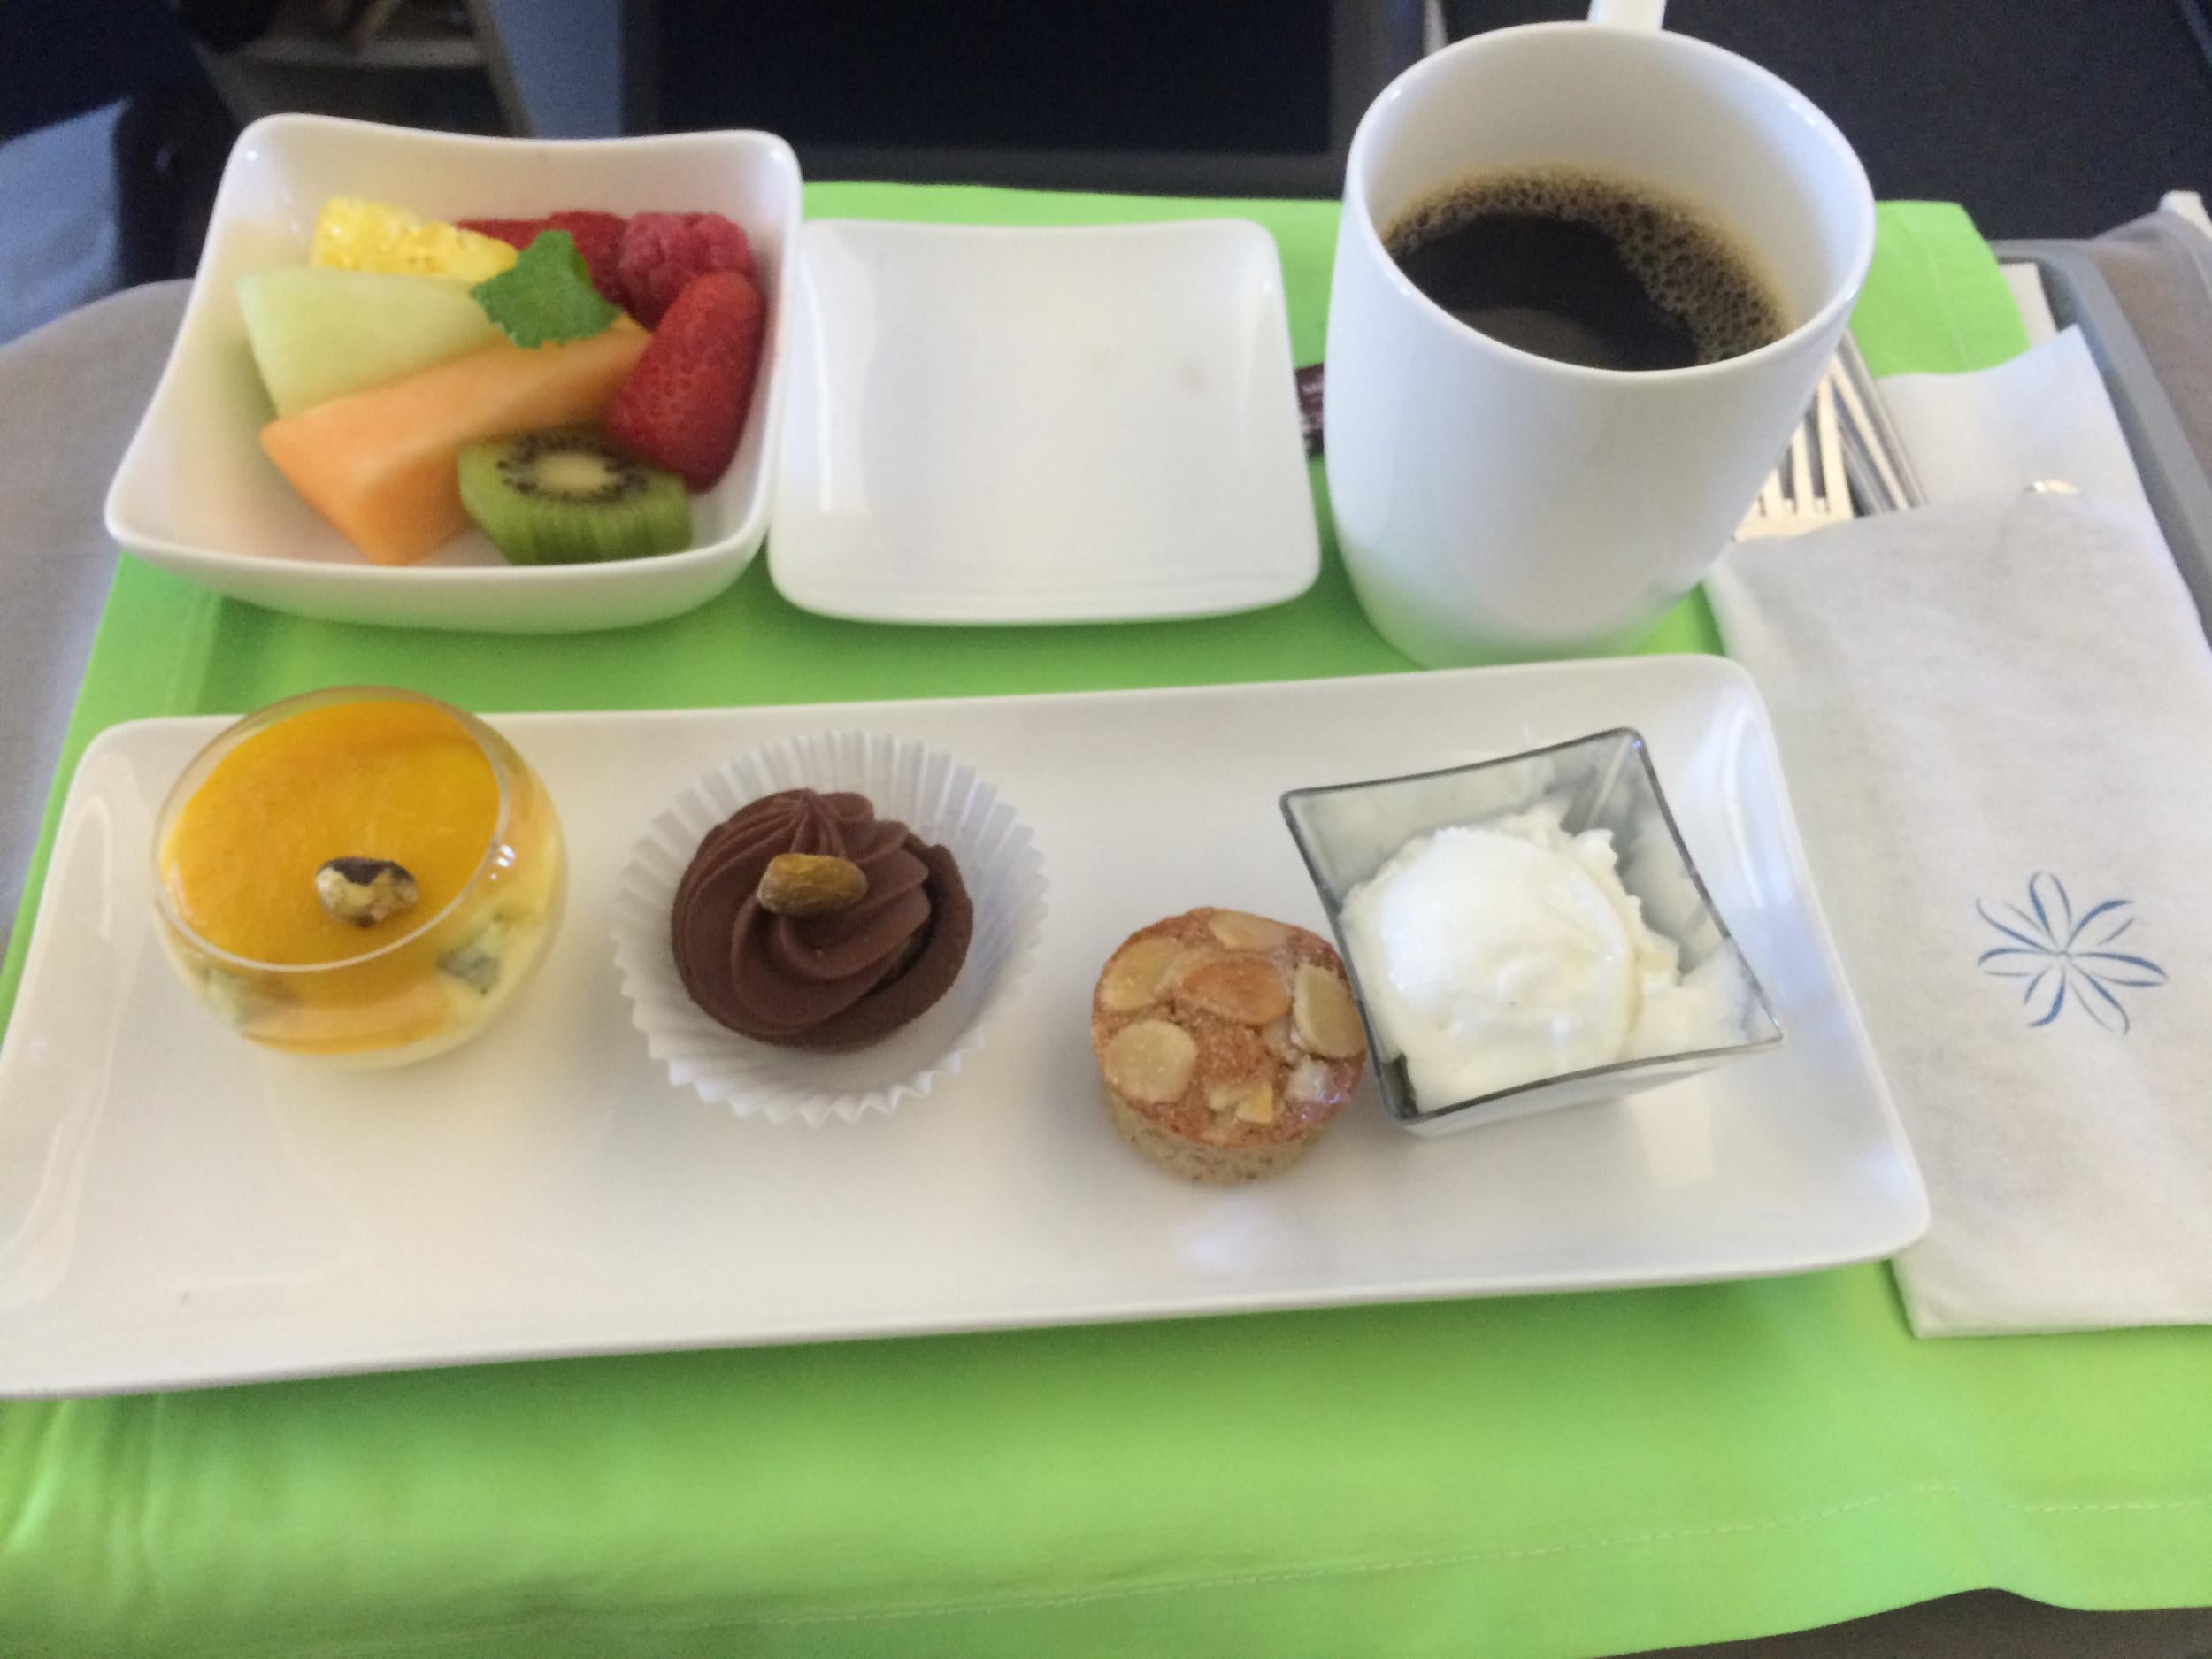 The five-strong dessert course in business class beat the pasta coated in cold soup a few rows back